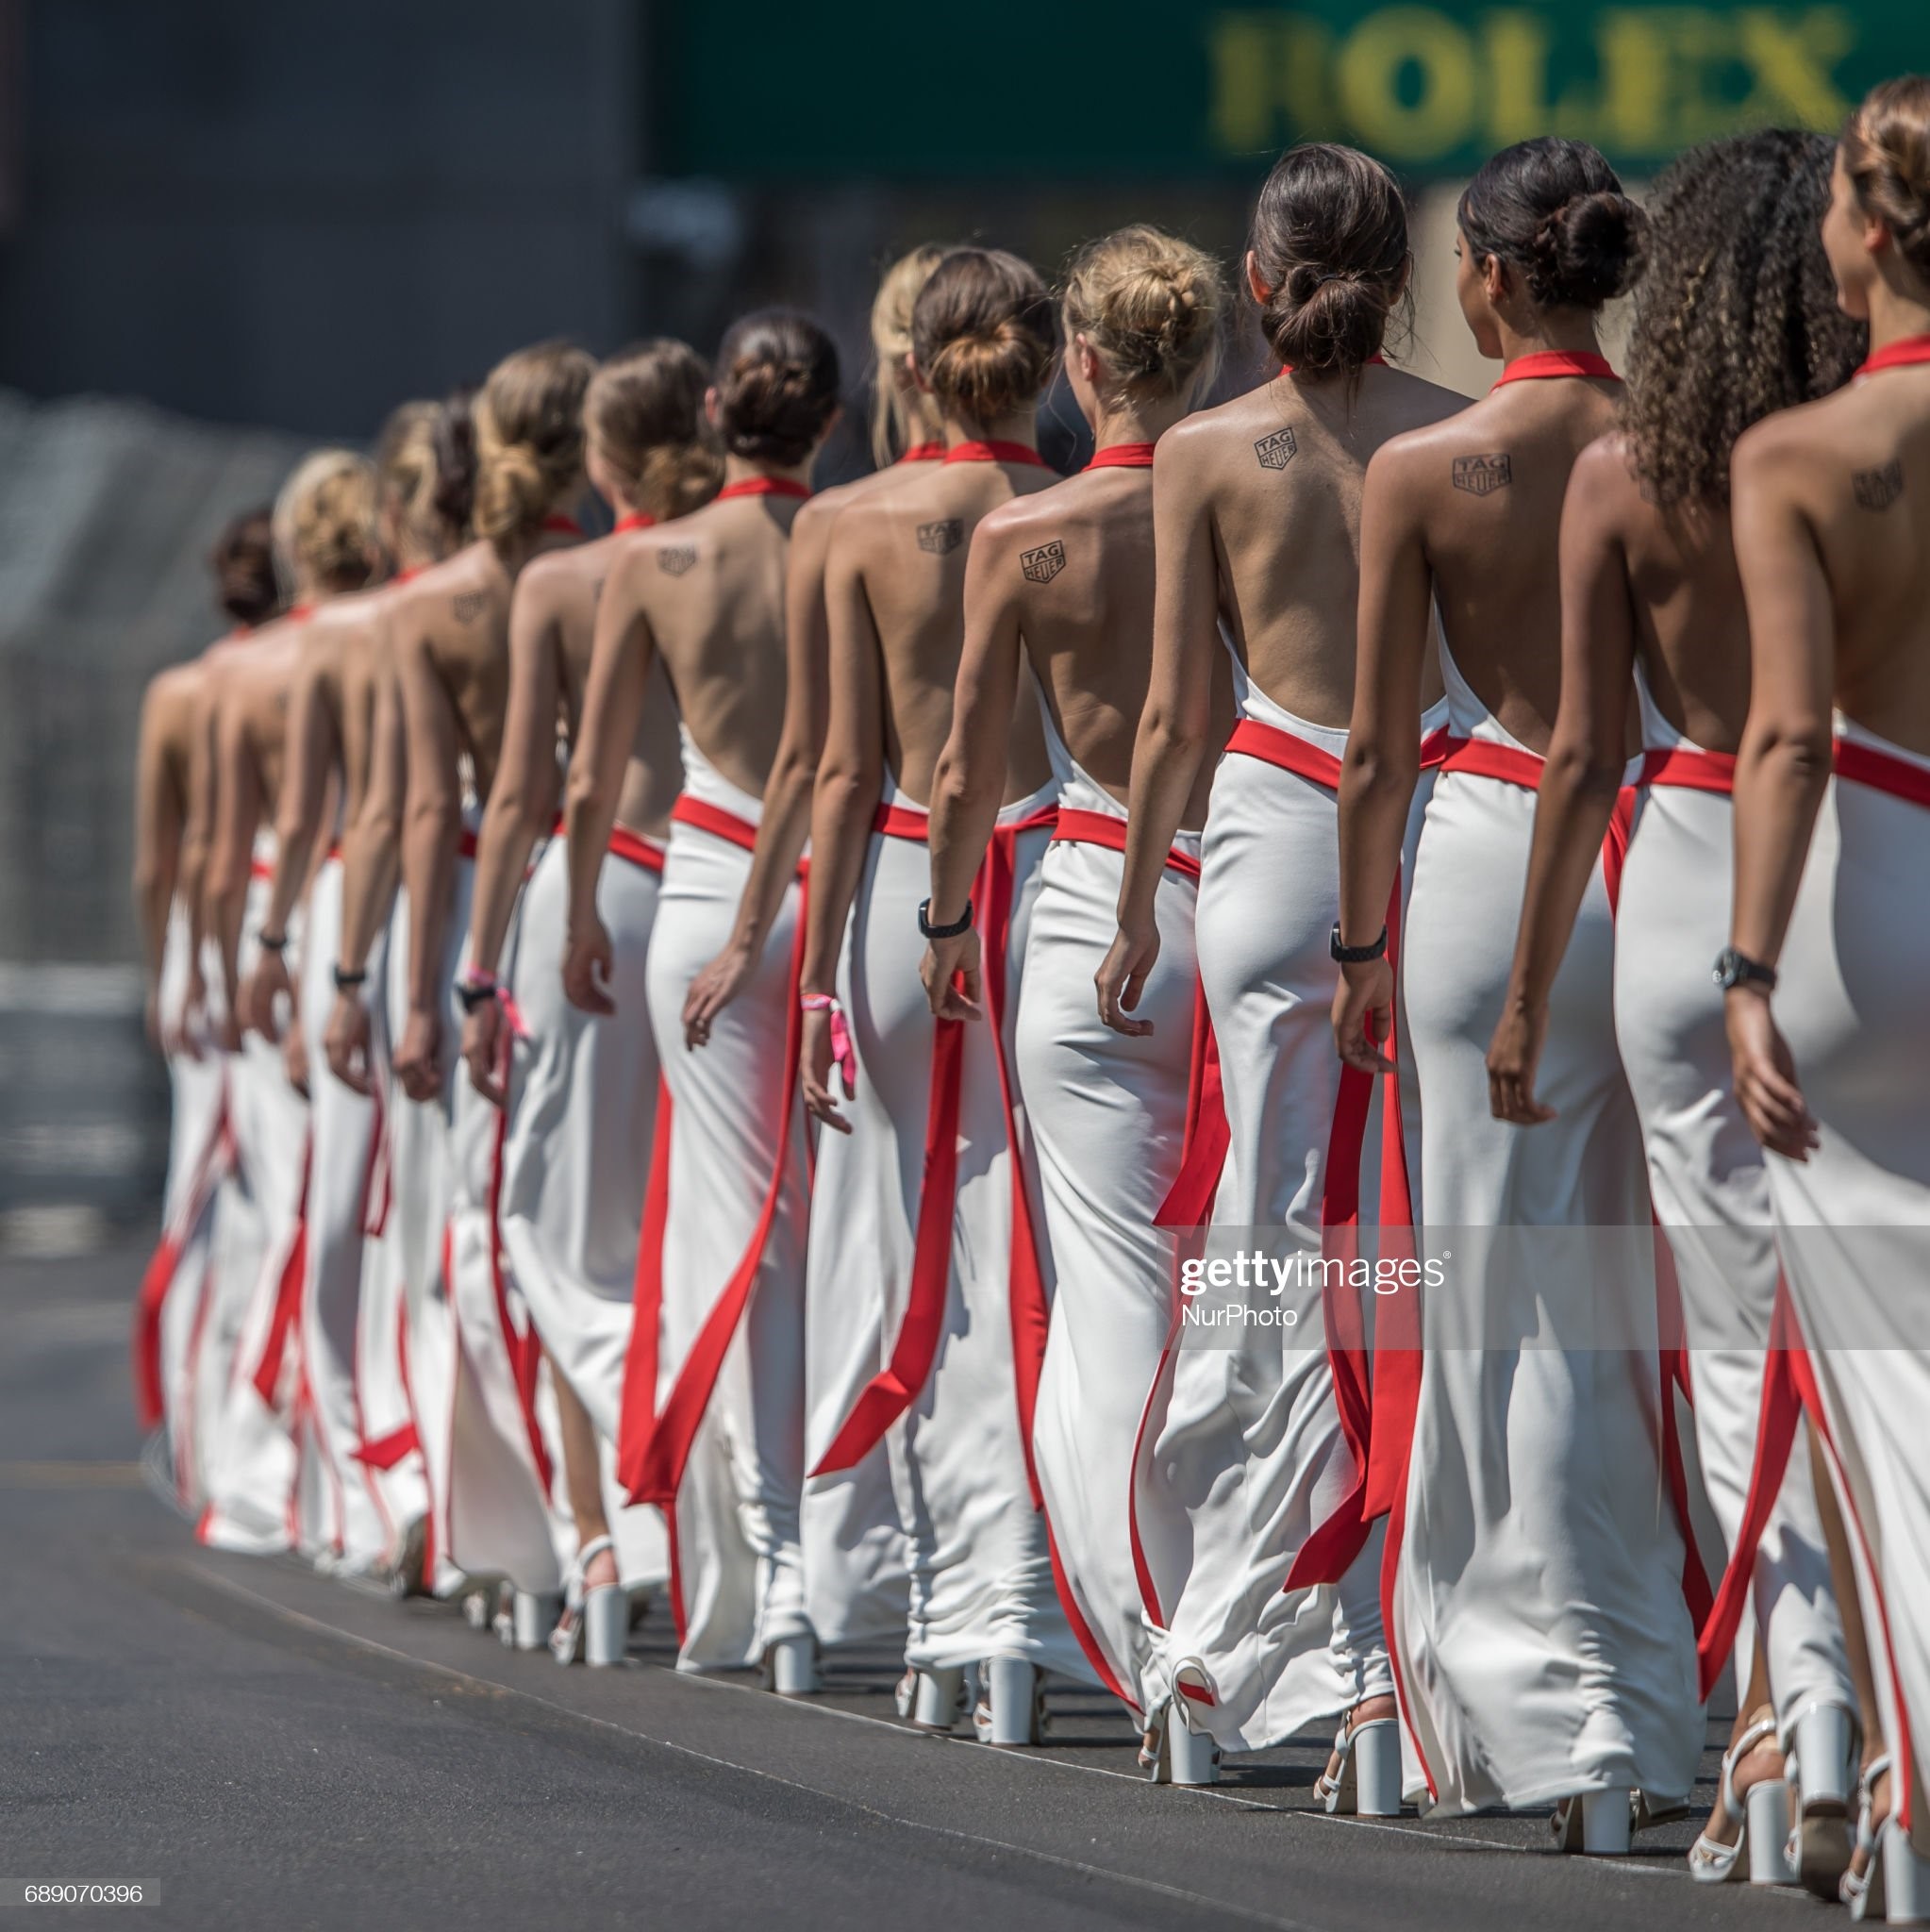 Grid girls are ready for the race at the Formula 1 Monaco Grand Prix on May 27, 2017 in Monte Carlo, Monaco. 